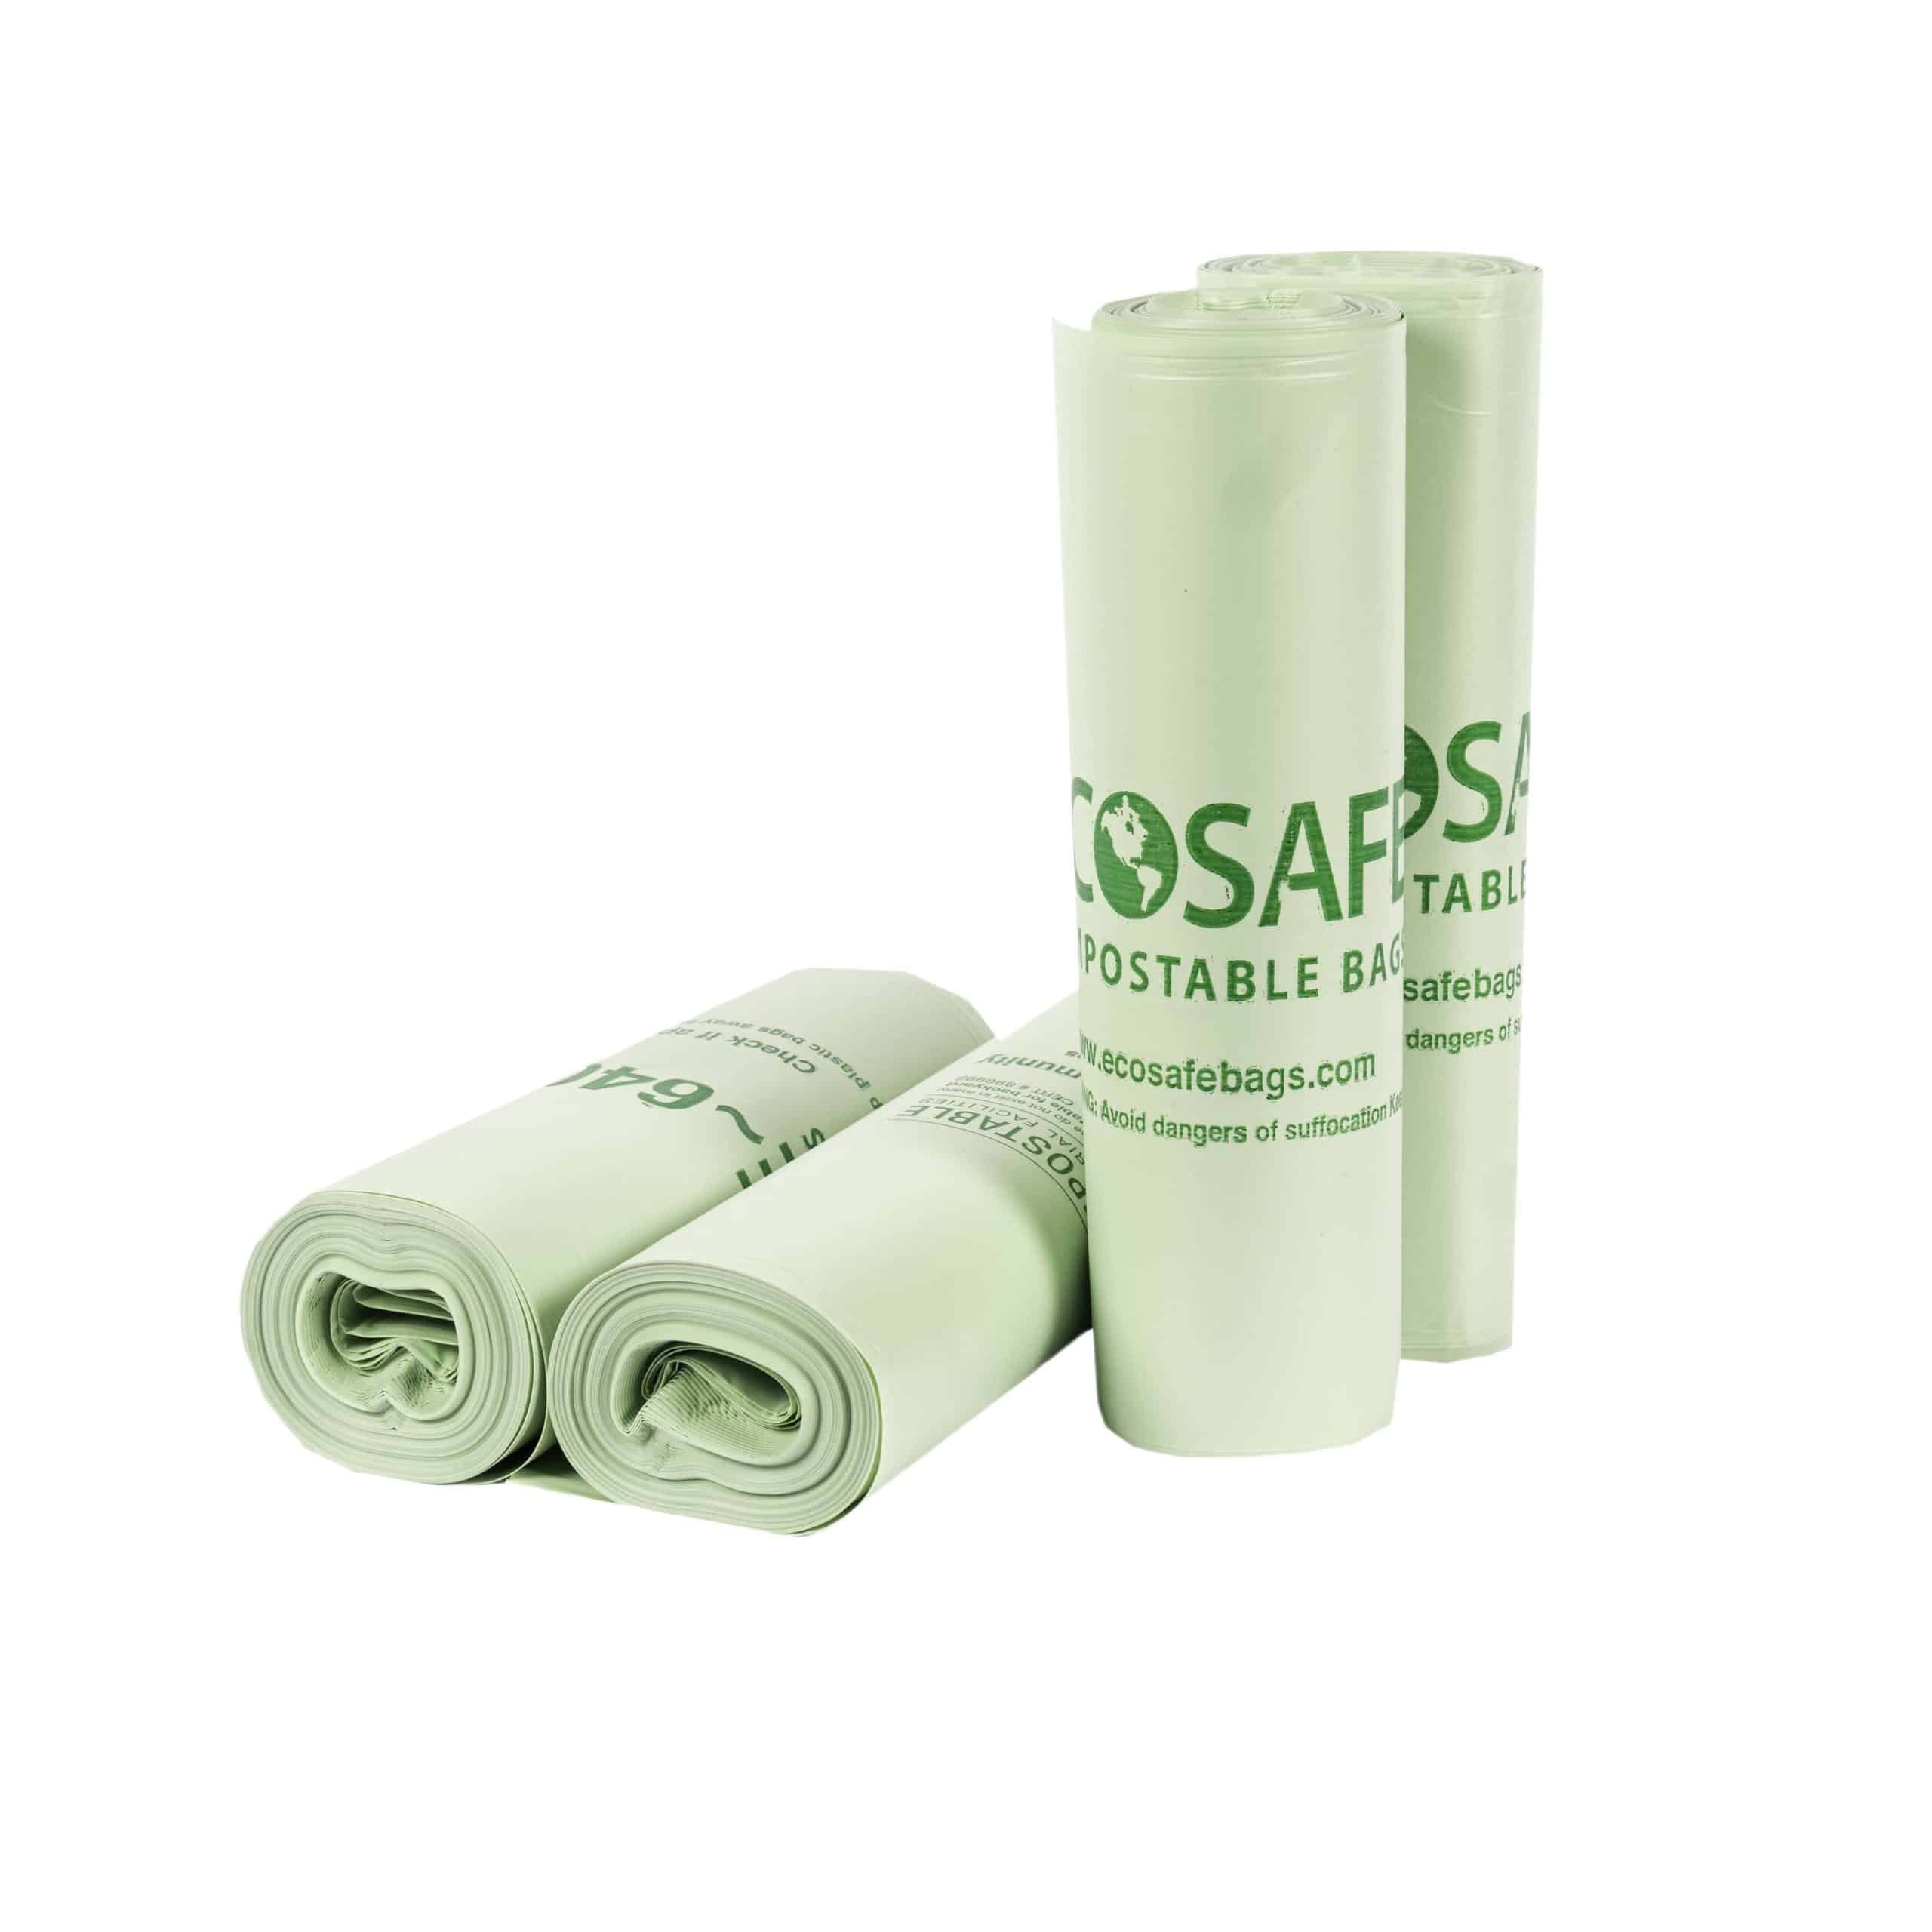 https://cdn.shopify.com/s/files/1/0612/3690/4162/products/EcoSafe-Compostable-Bags-HB3339-85-Rolls-min-1-scaled.jpg?v=1660671479